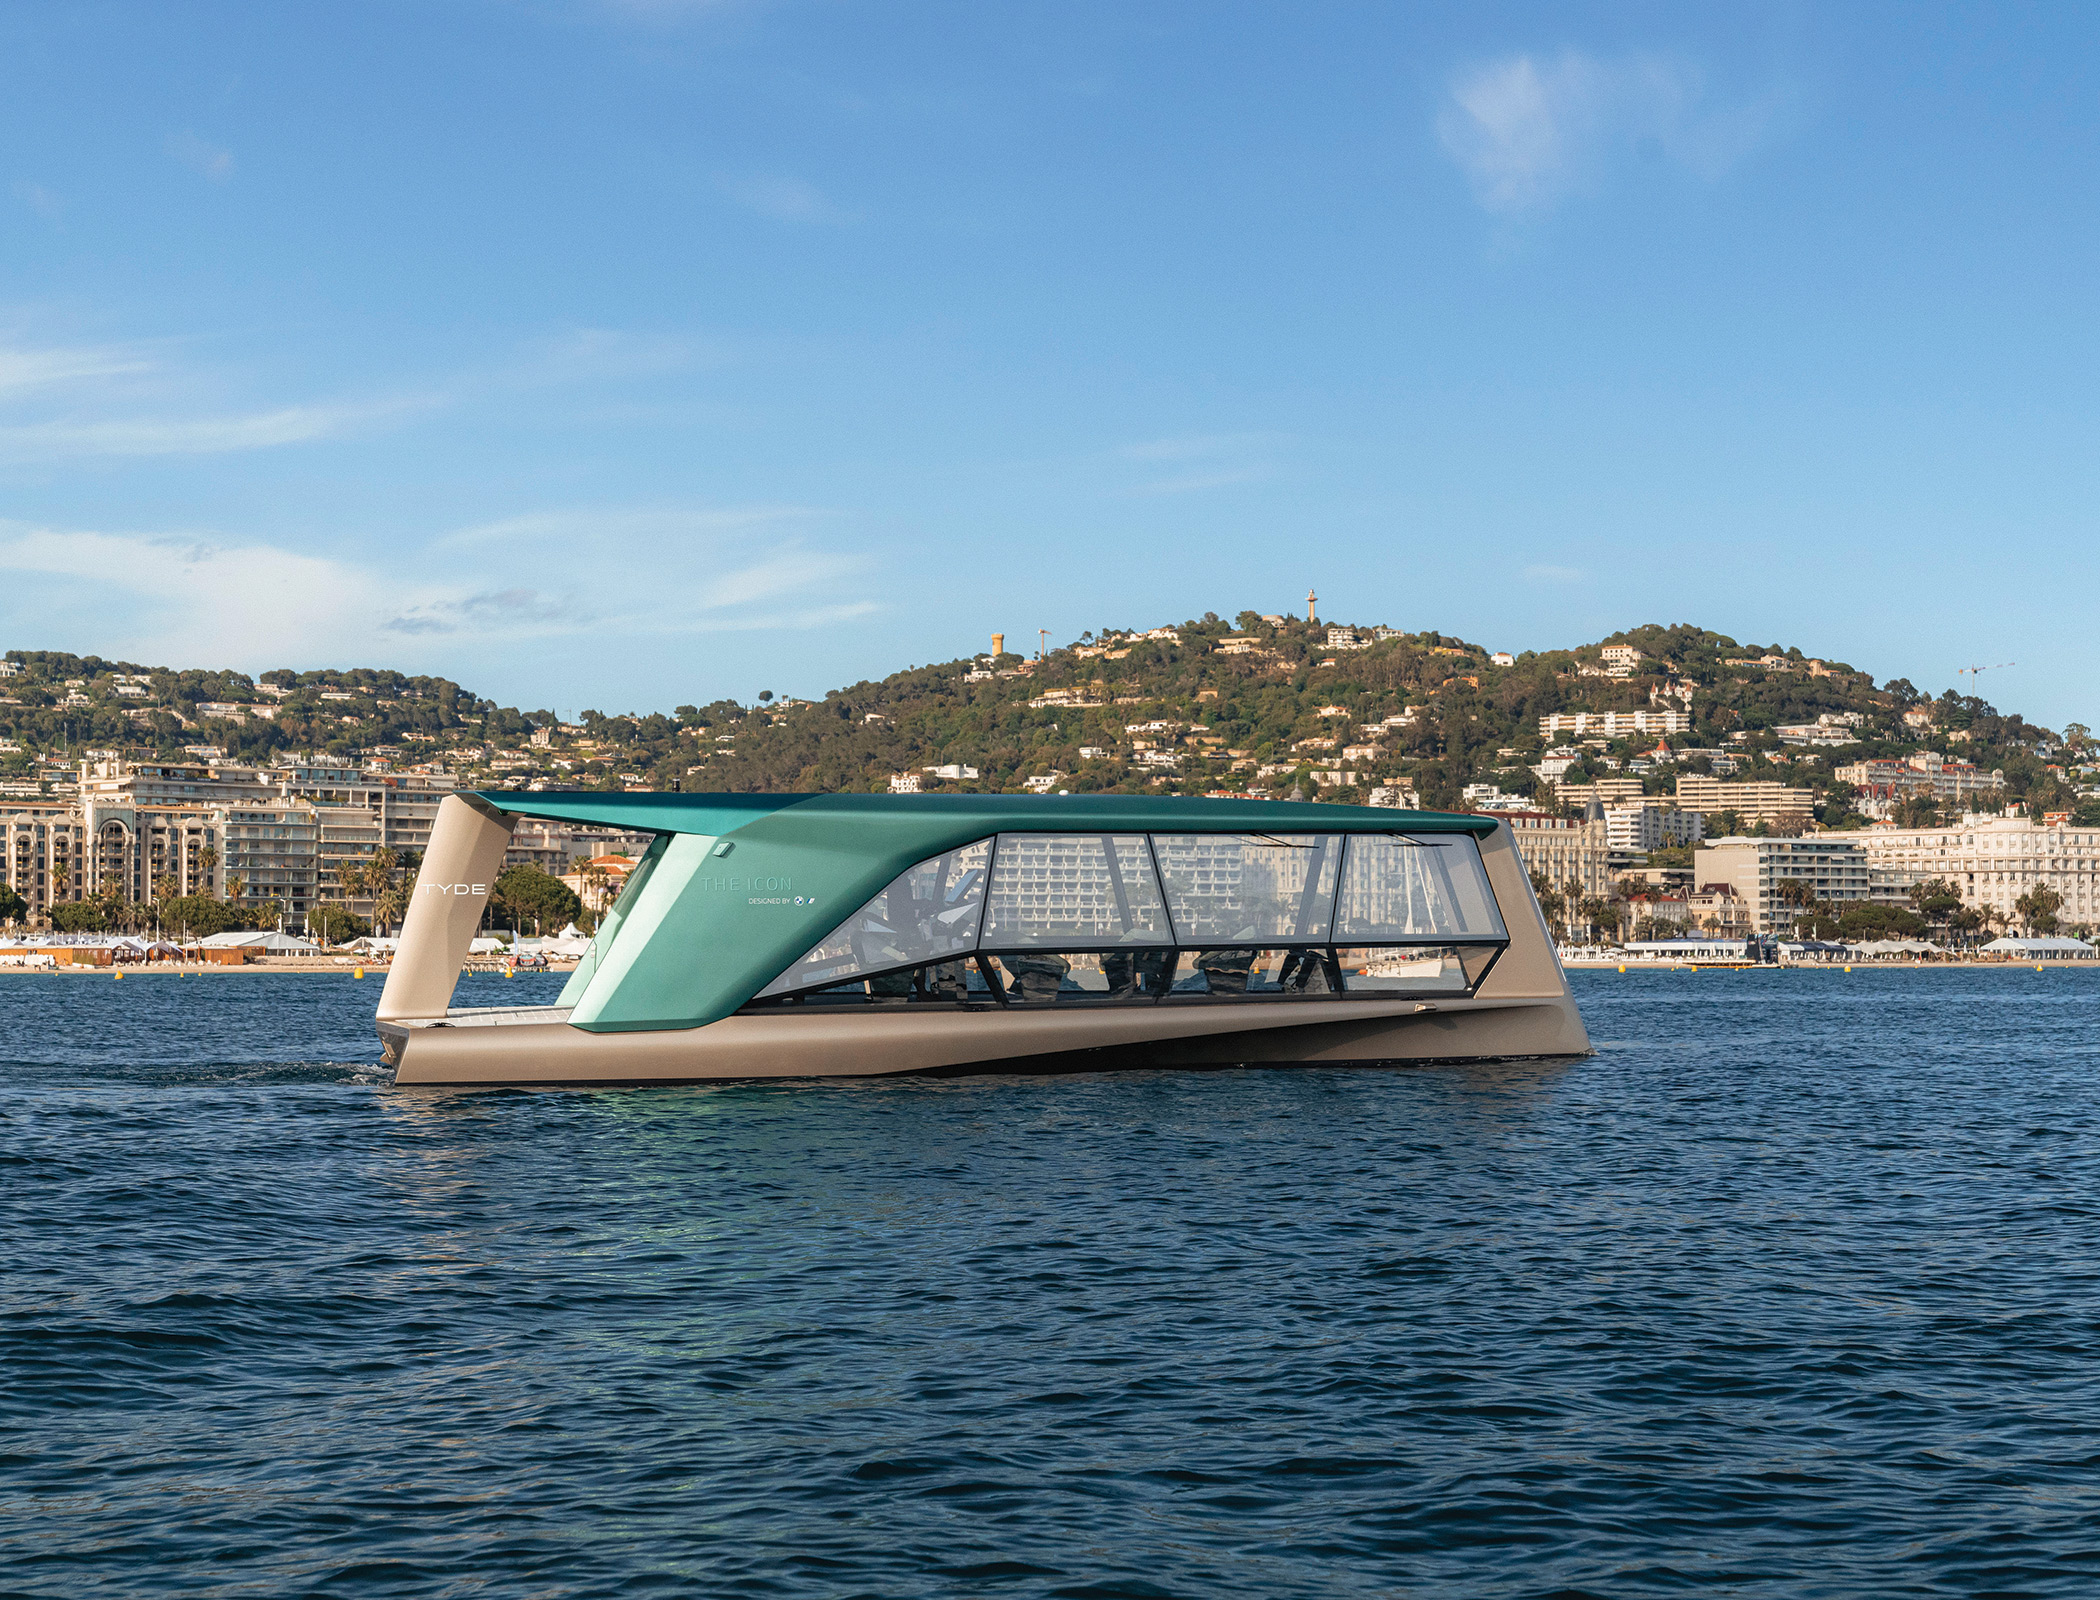 The measure of: The Icon luxury mini yacht